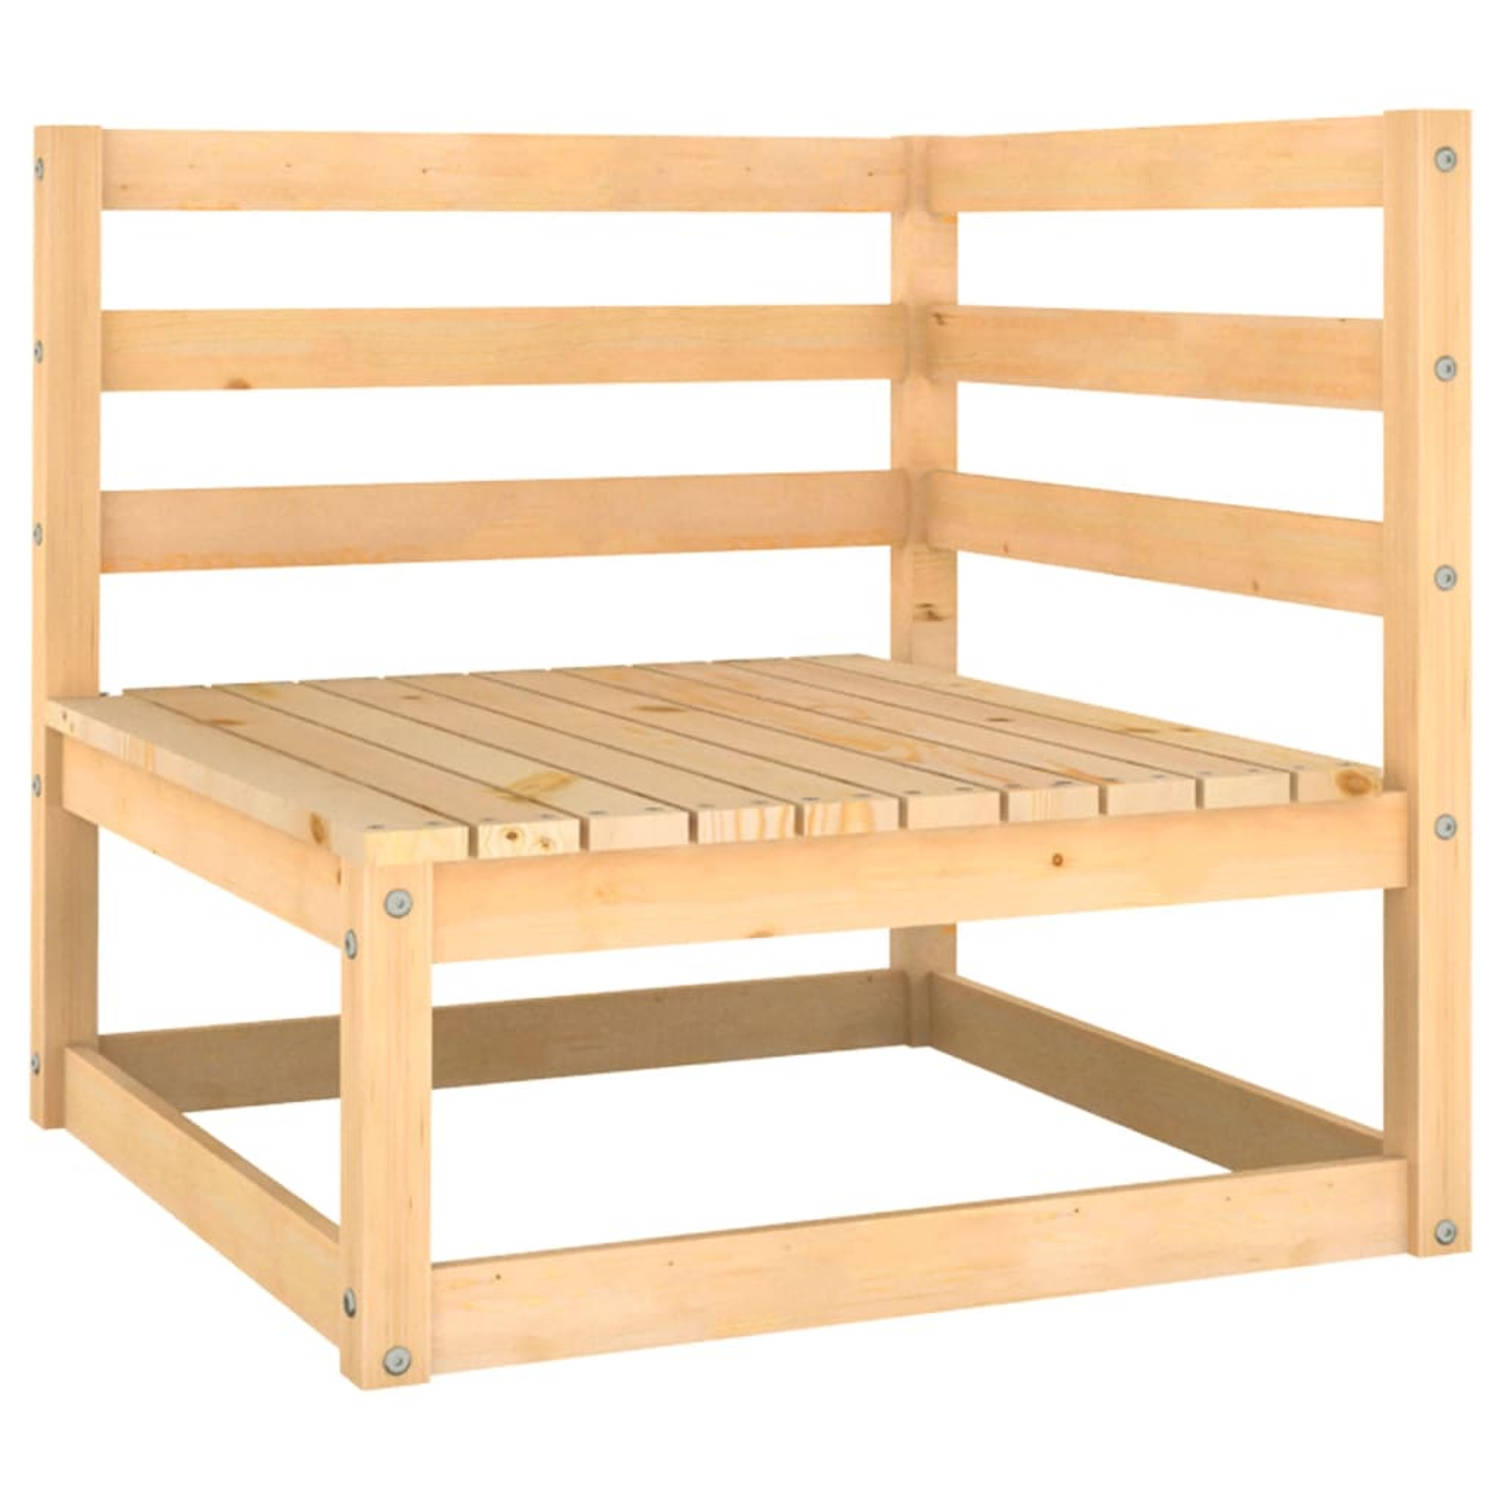 The Living Store Pallet Loungeset - Tuinmeubelen - 70x70x67 cm - Grenenhout